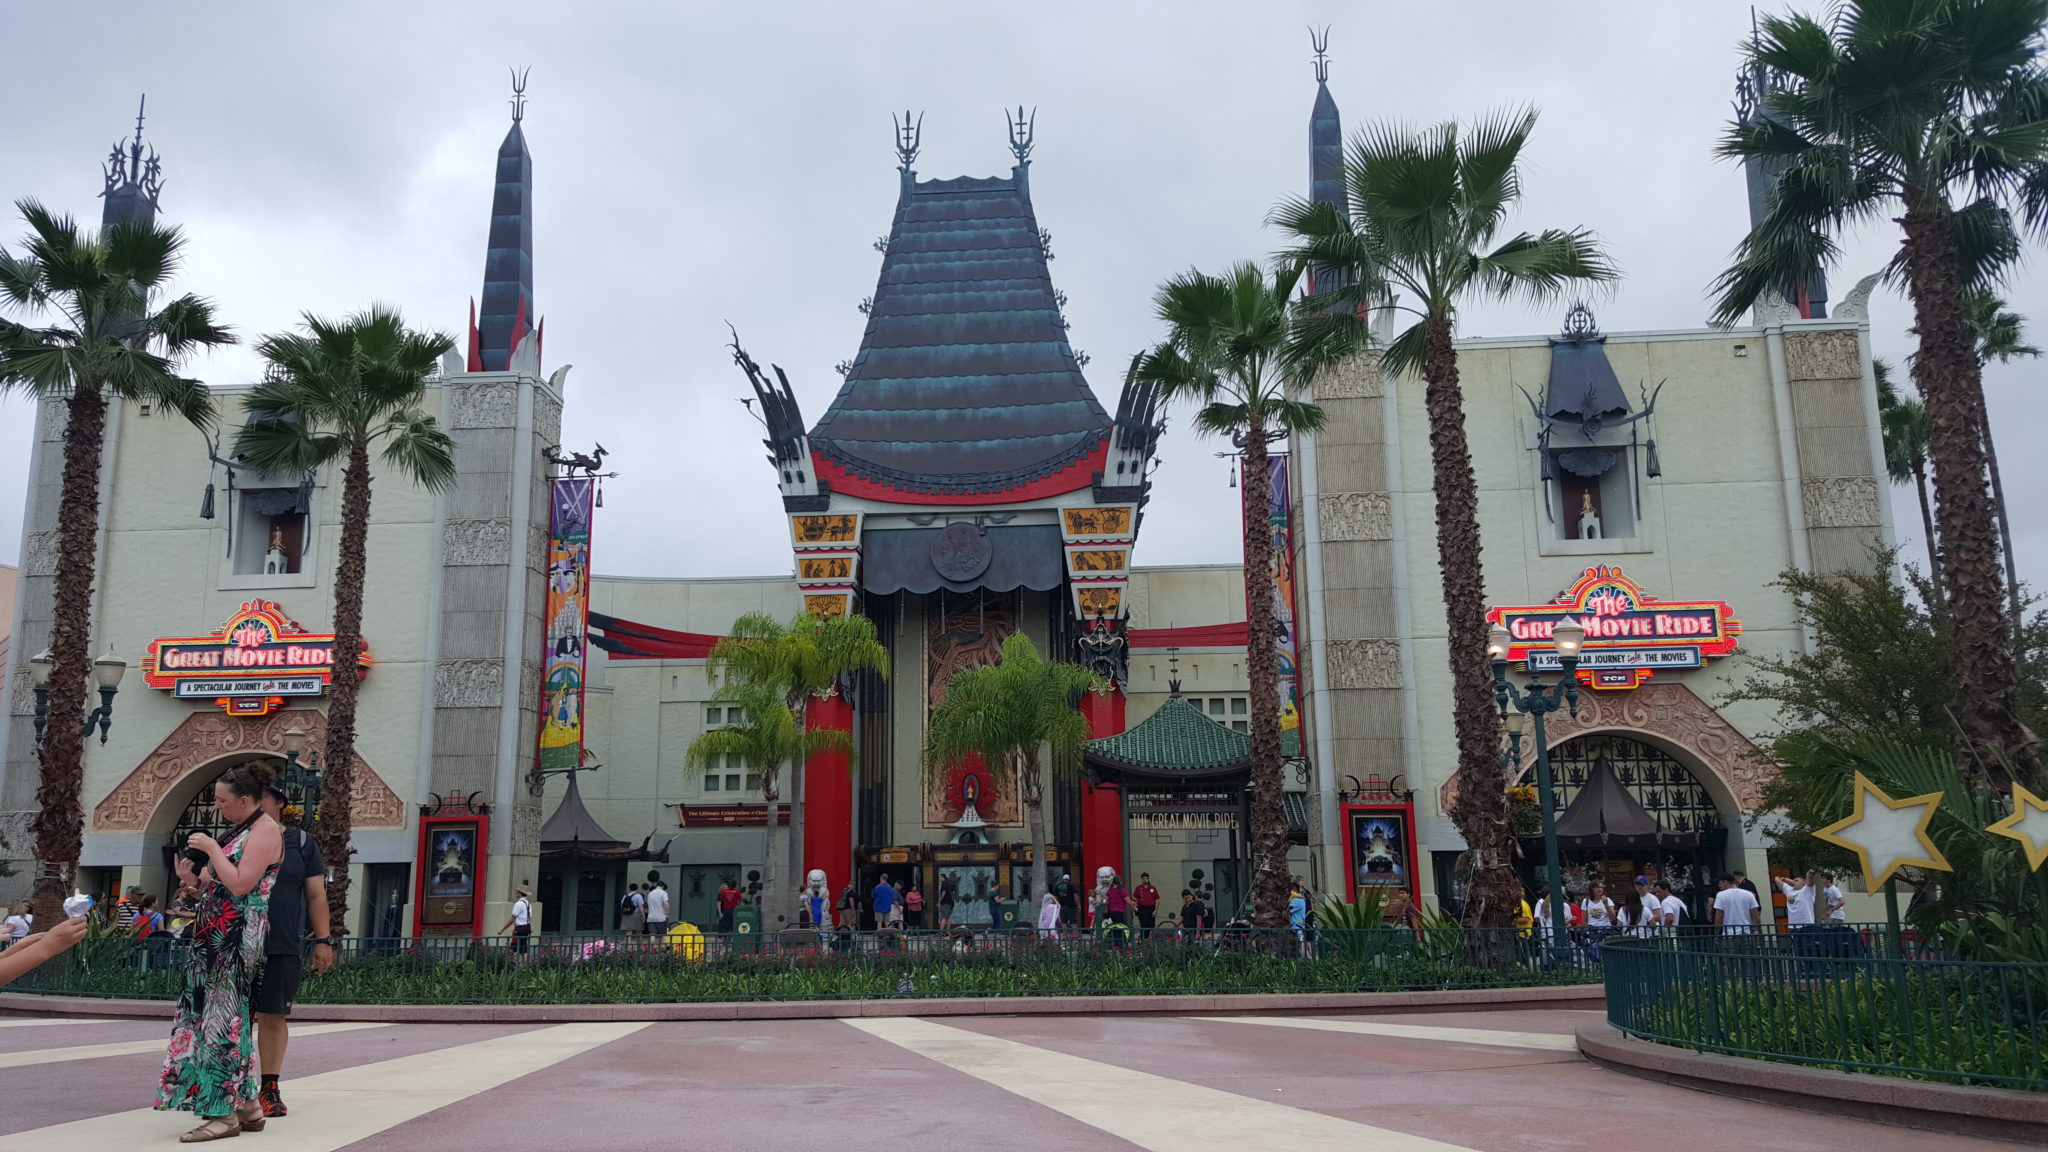 Is the Great Movie Ride Closing in 2018?